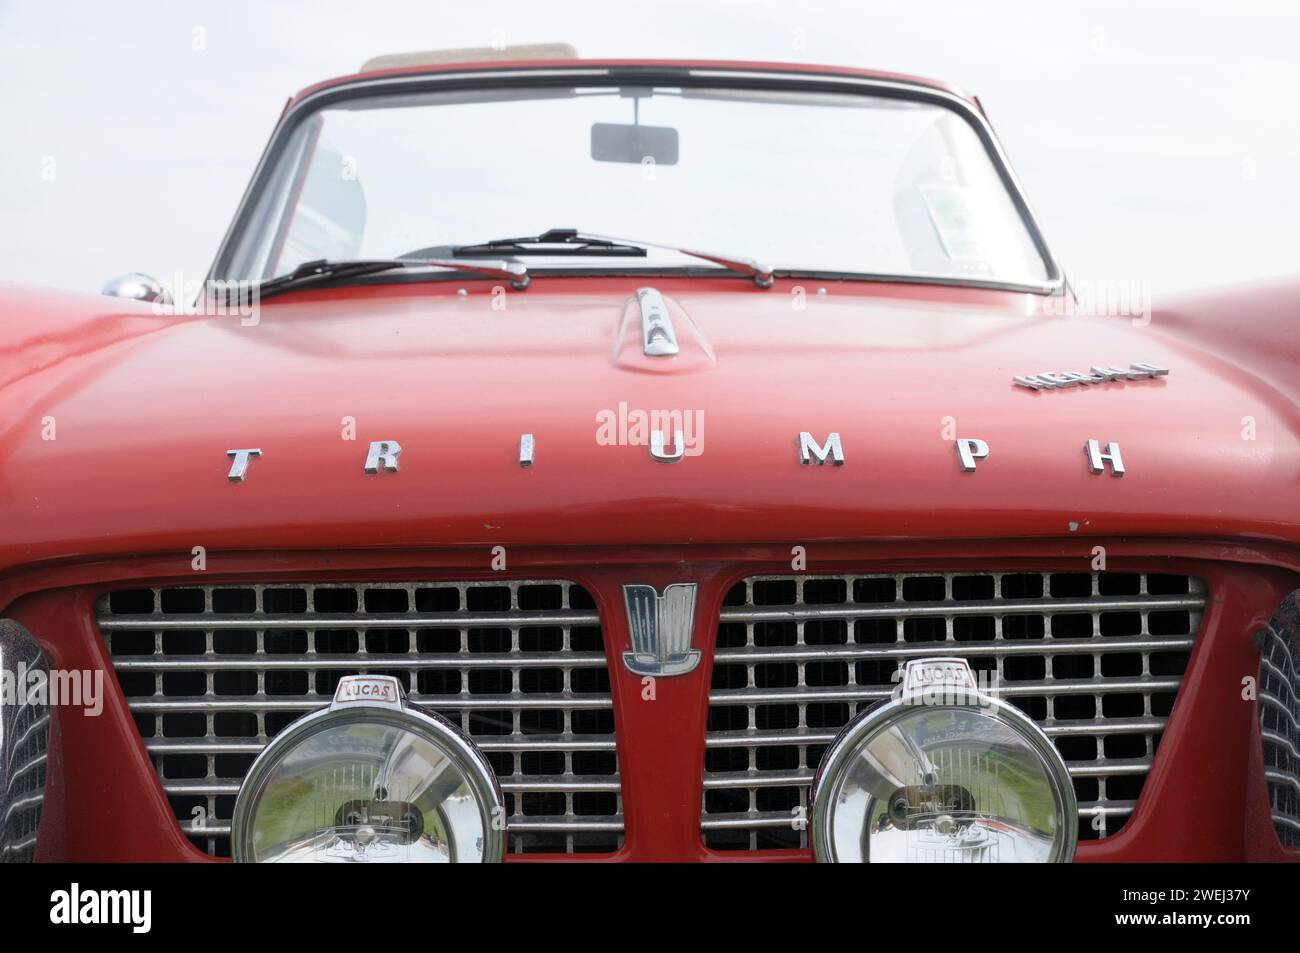 Front view of a red convertible Triumph Herald classic car.  1960s, classic cars, vintage, retro Stock Photo